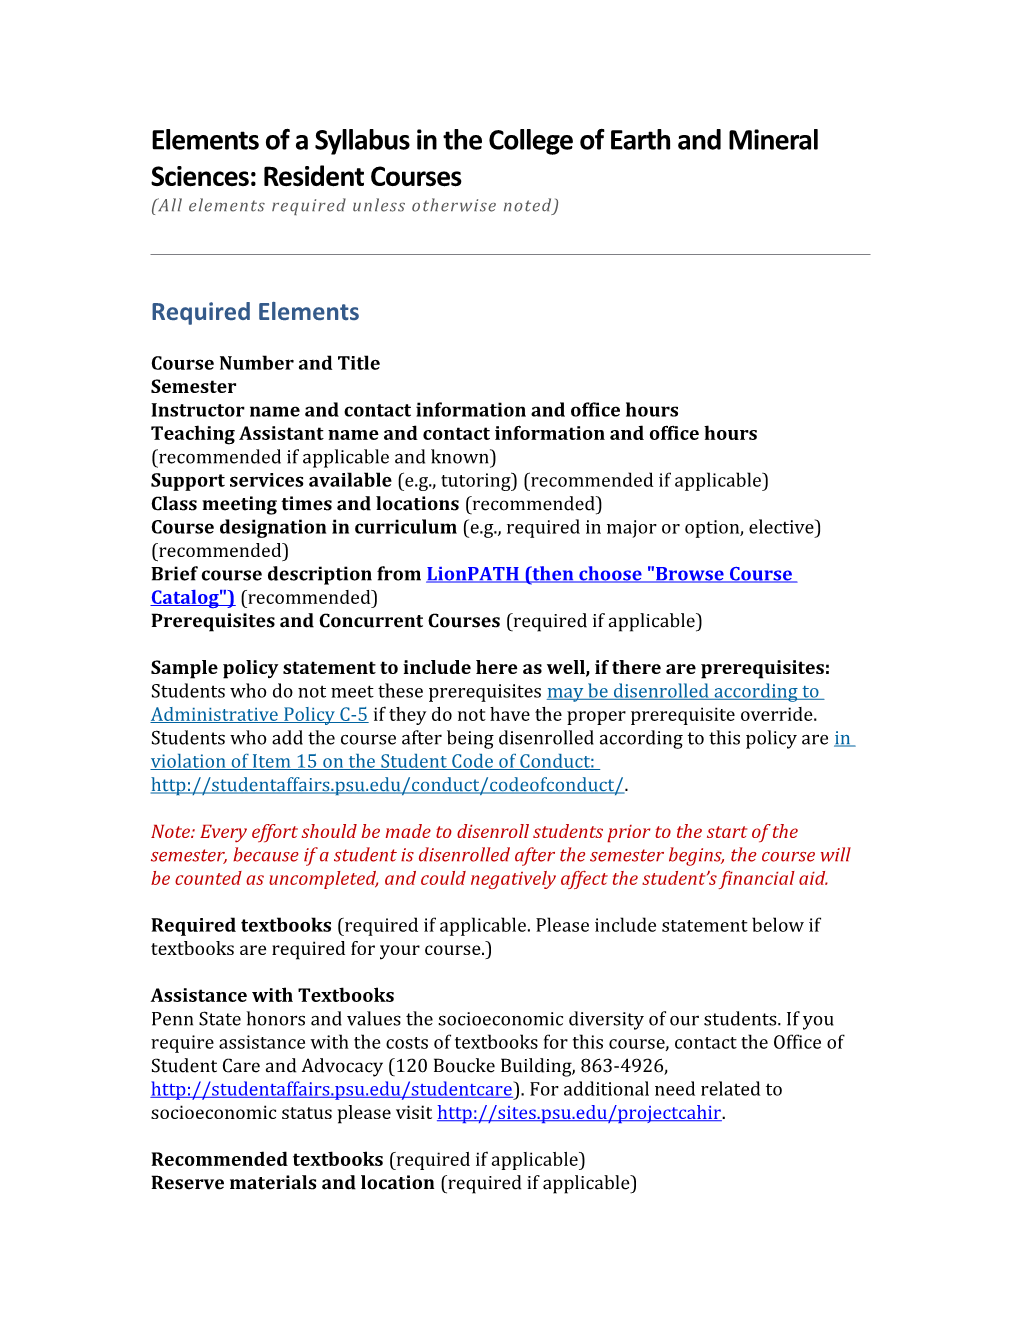 Elements of a Syllabus in the College of Earth and Mineral Sciences: Resident Courses